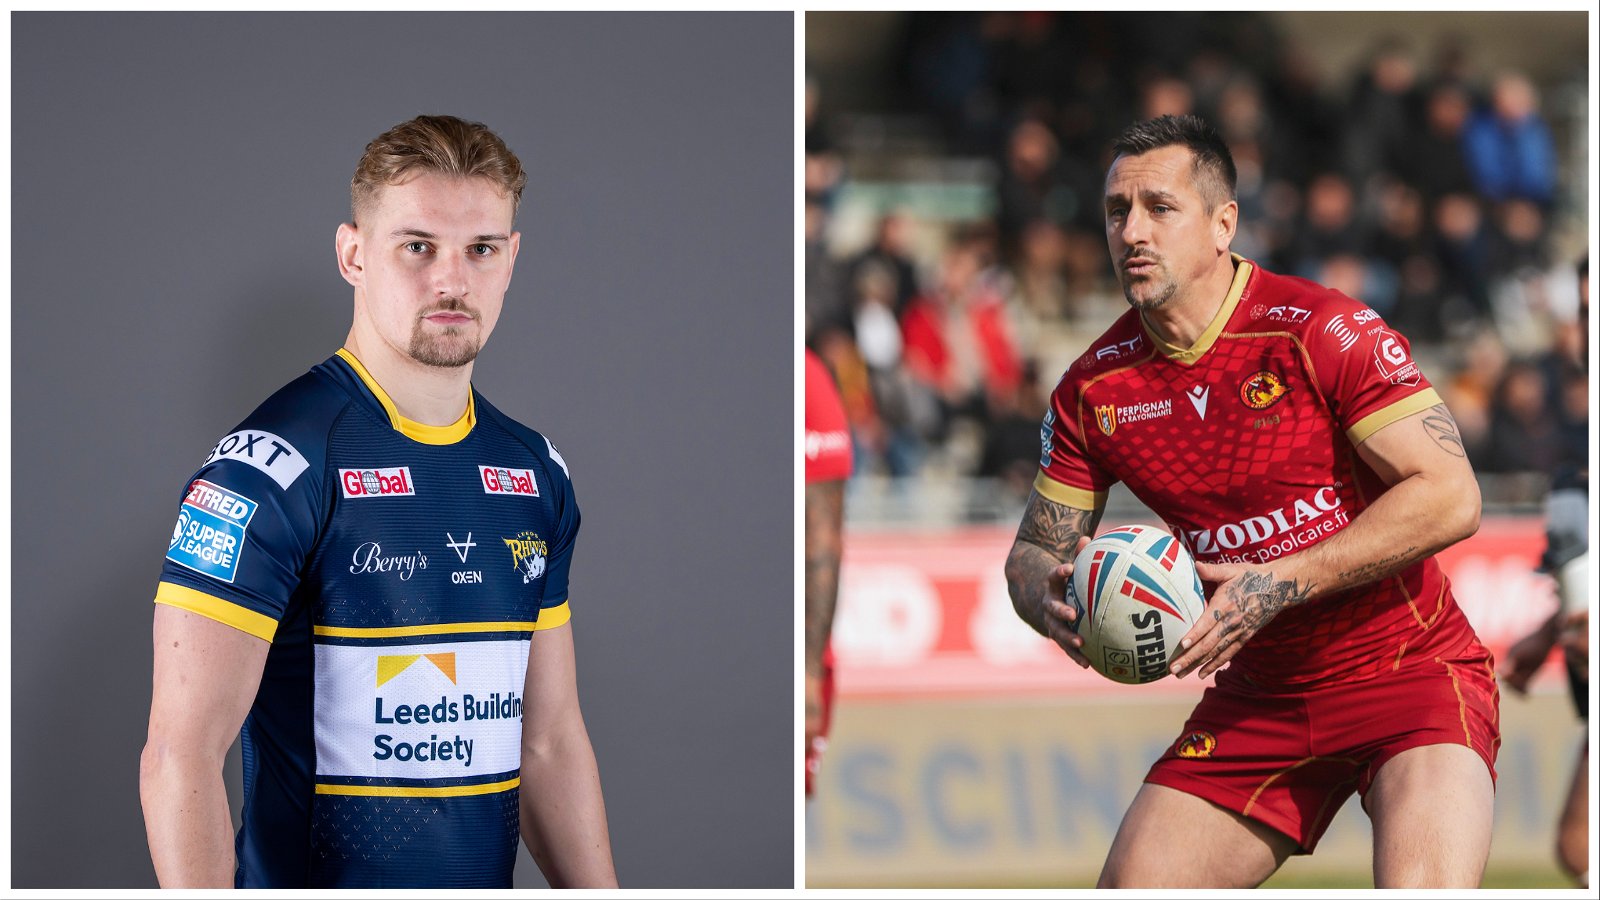 Leeds Rhinos vs Catalans Dragons Kick-off time, TV Channel and Team News